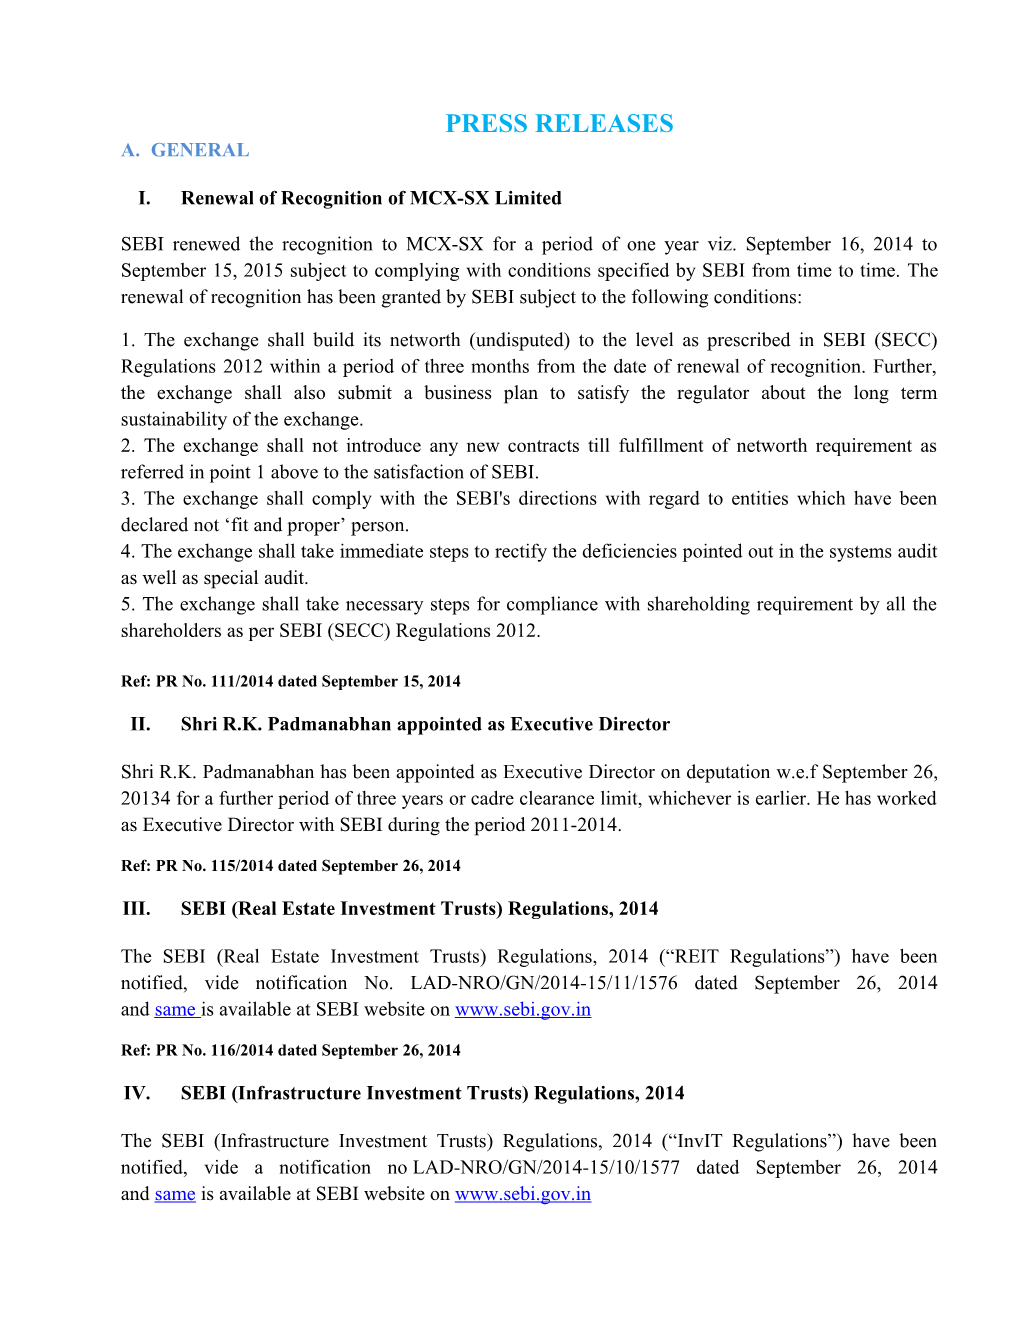 I. Renewal of Recognition of MCX-SX Limited